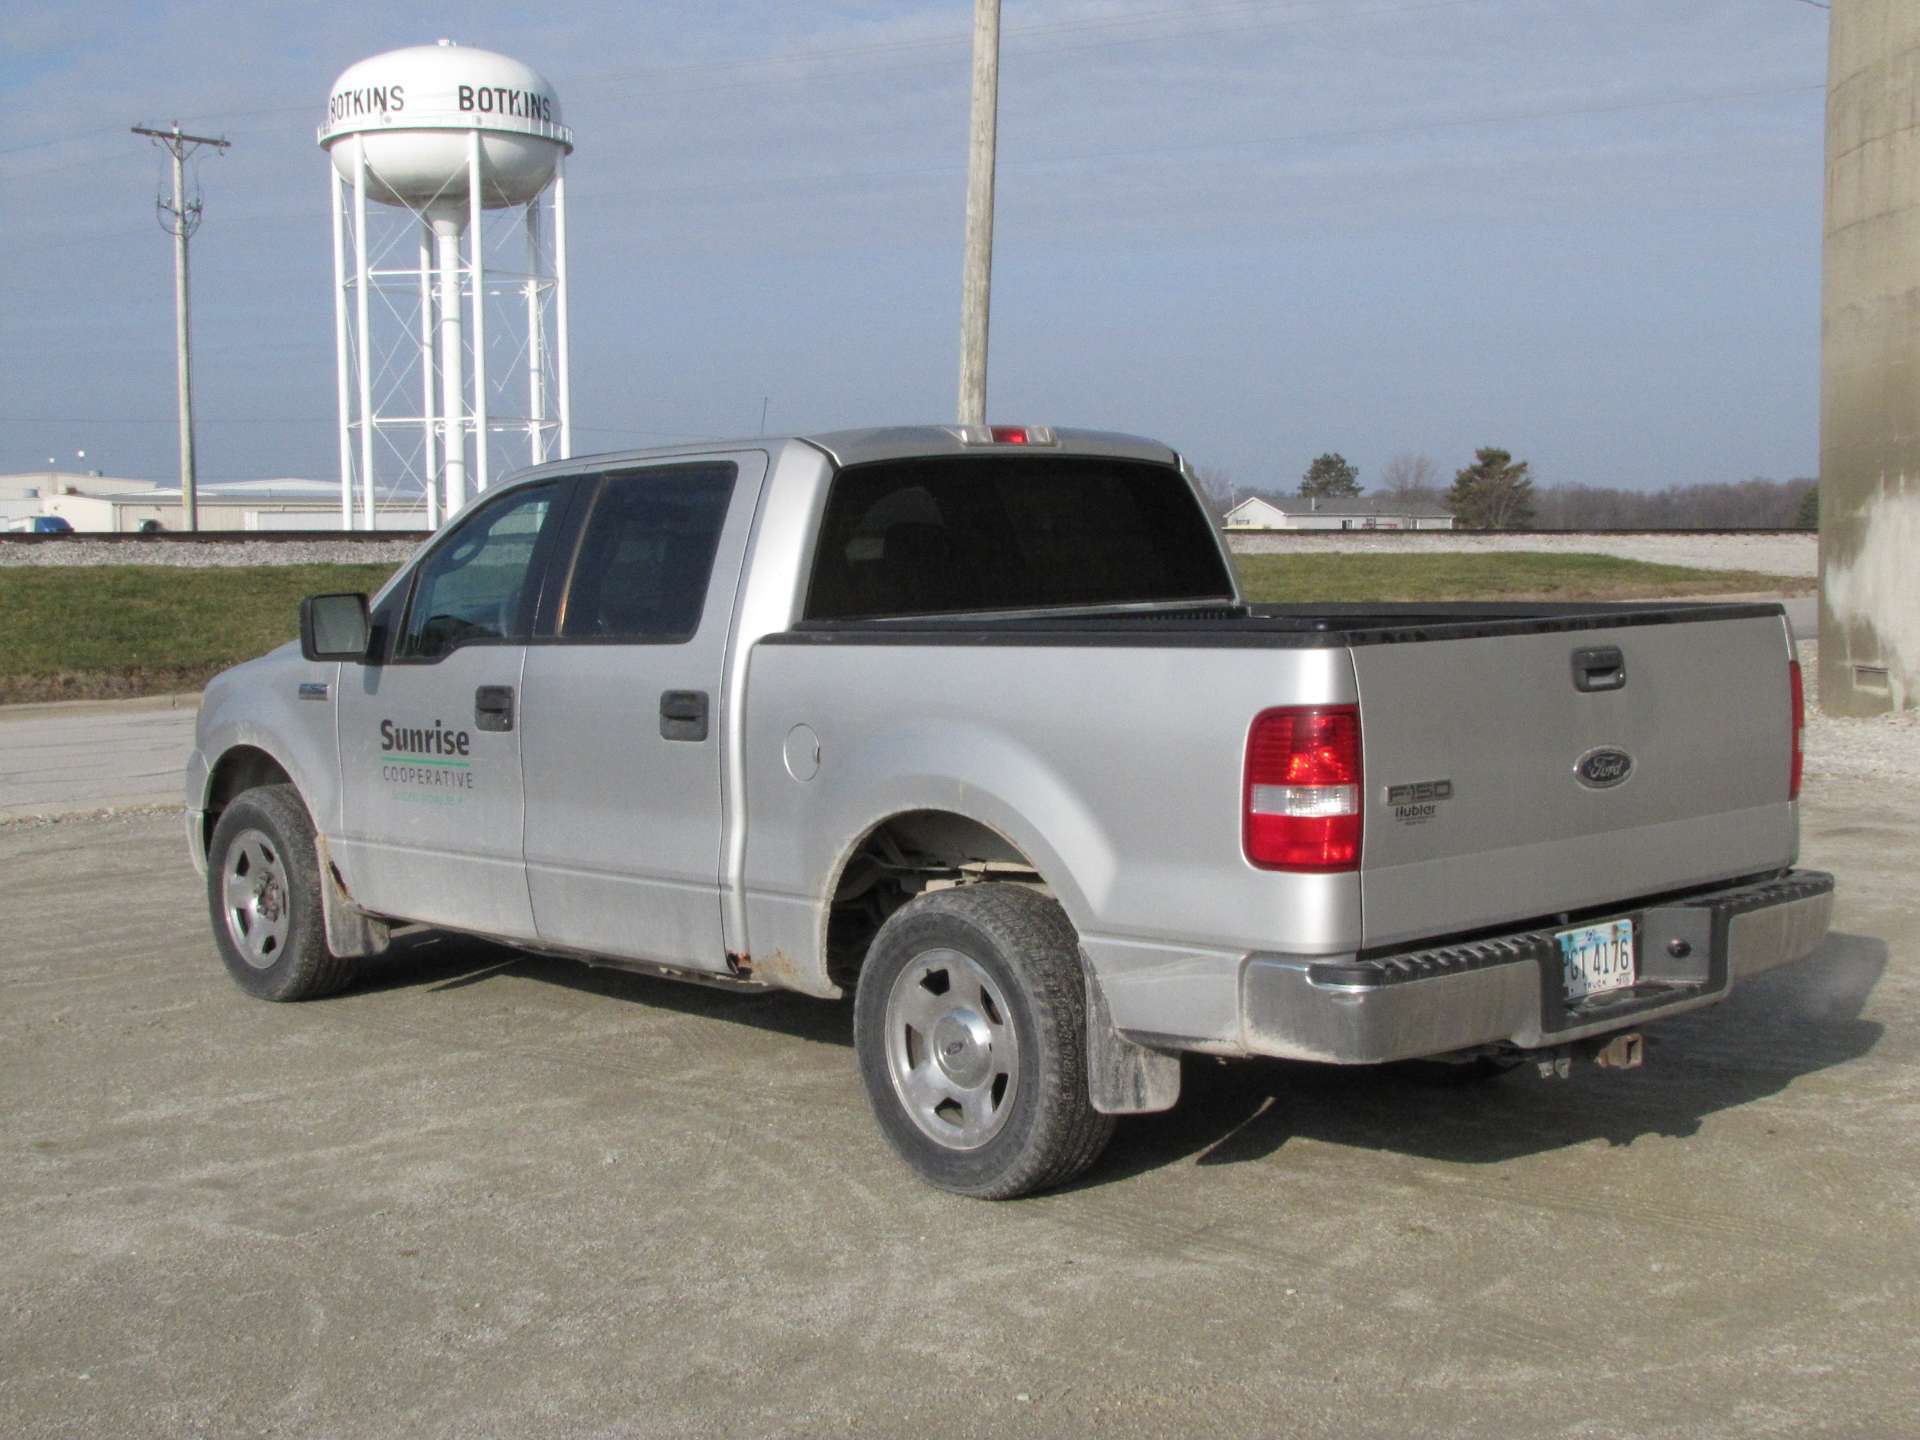 2005 Ford F-150 XLT pickup truck - Image 7 of 89